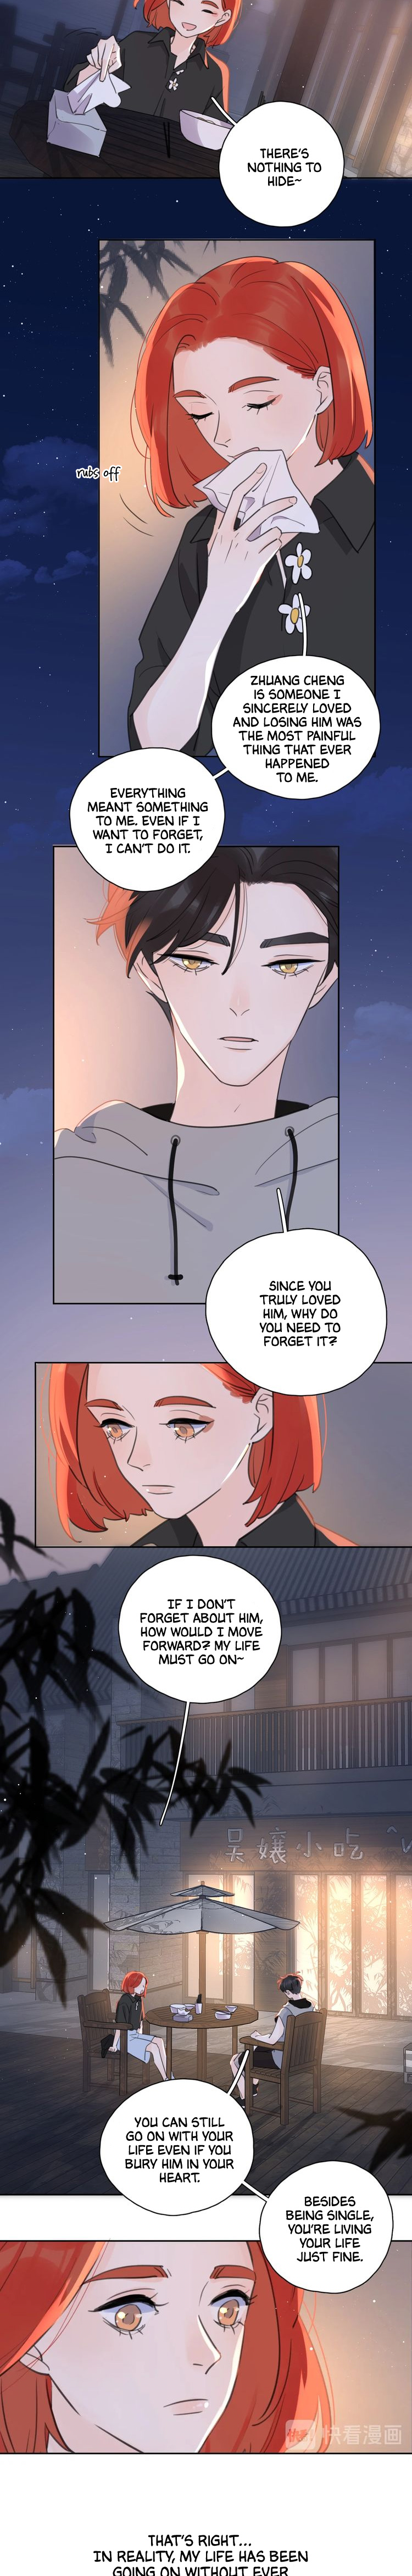 The Looks Of Love: The Heart Has Its Reasons - Page 4